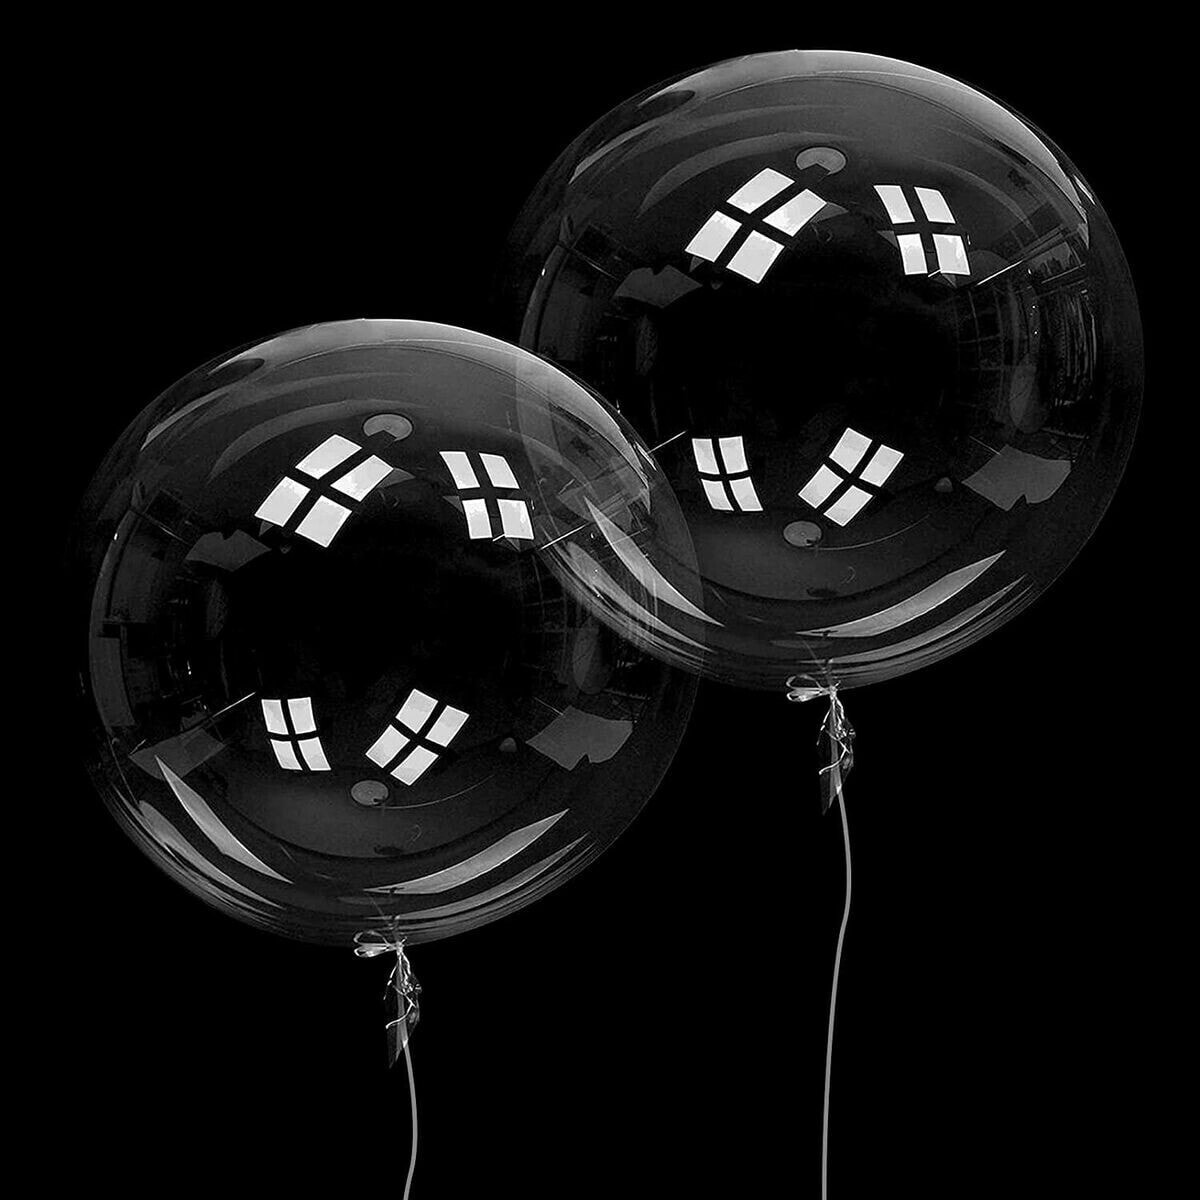 Decoration Balloons WS-44 (Refurbished A)